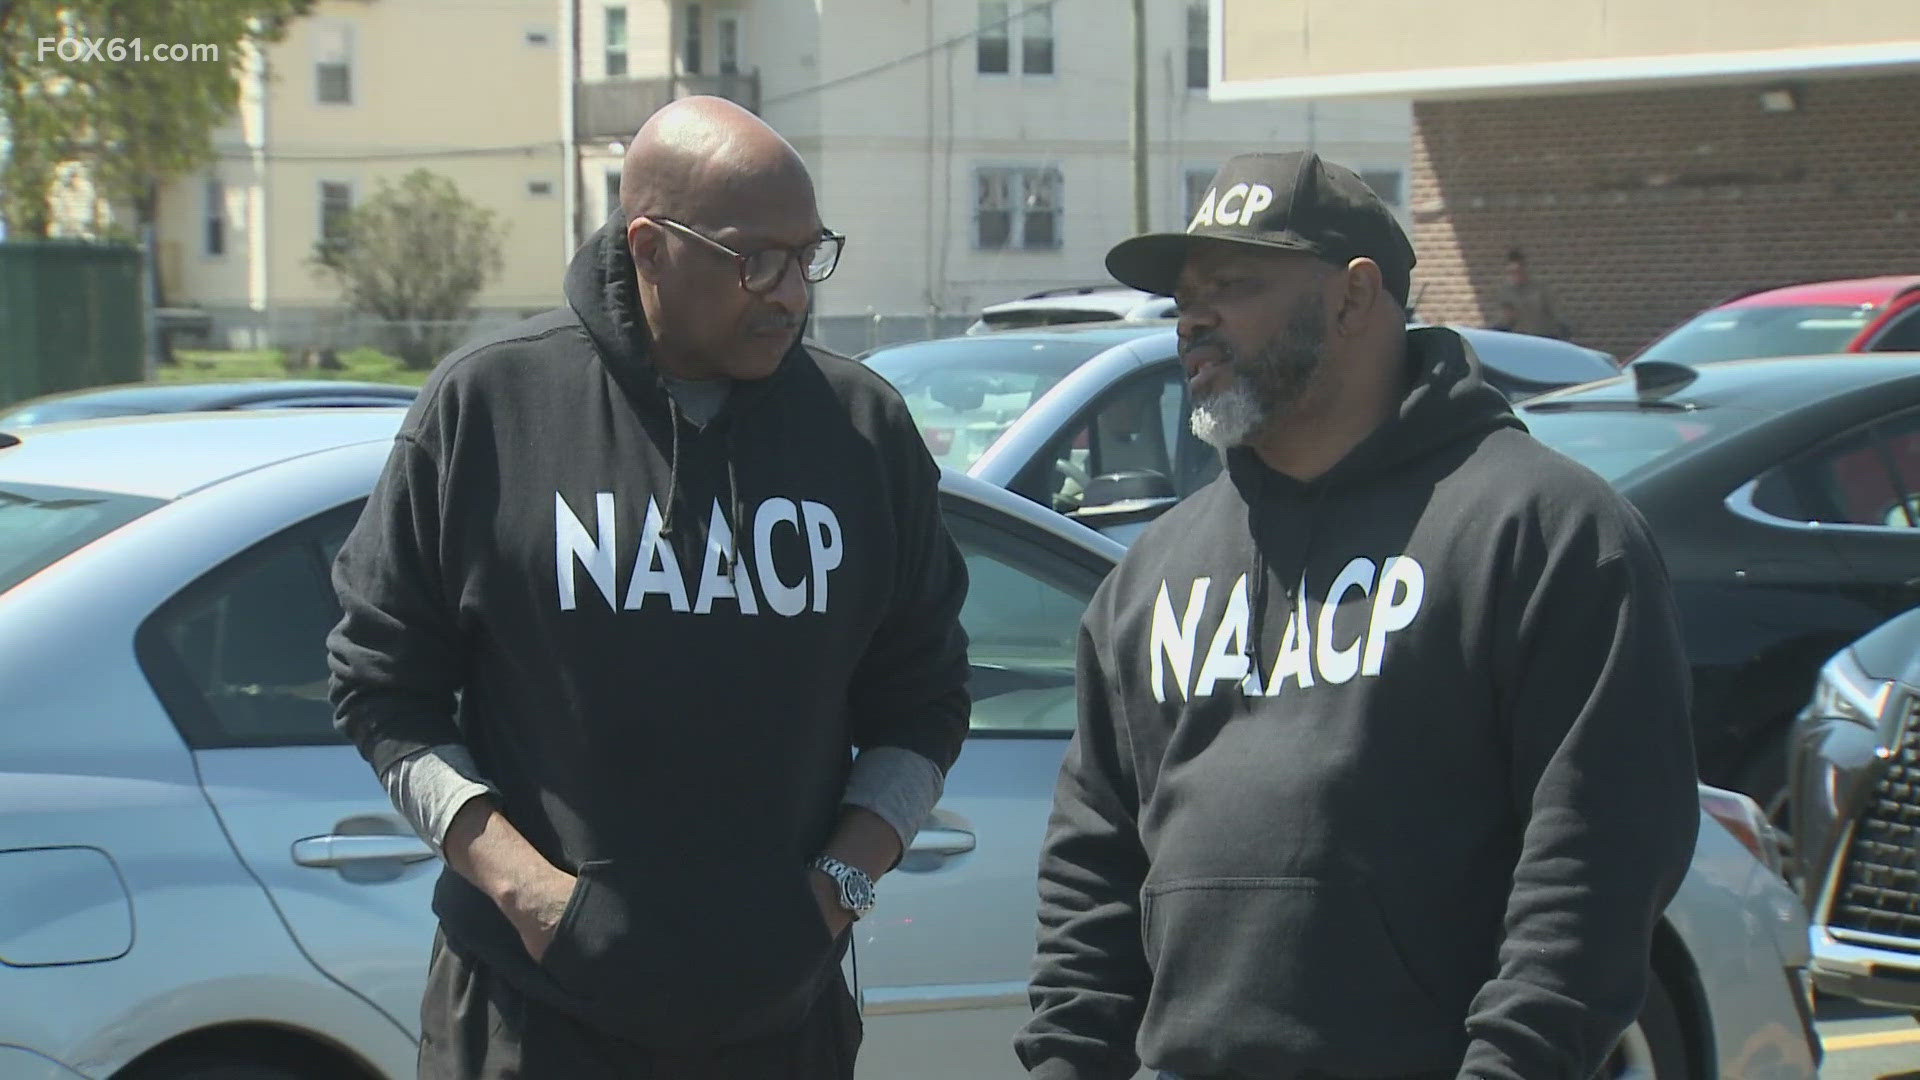 The Greater Hartford NAACP community initiative Wakeup Wednesday has been active for nine months. Since then, there have been no gun-related fatalities in the area.